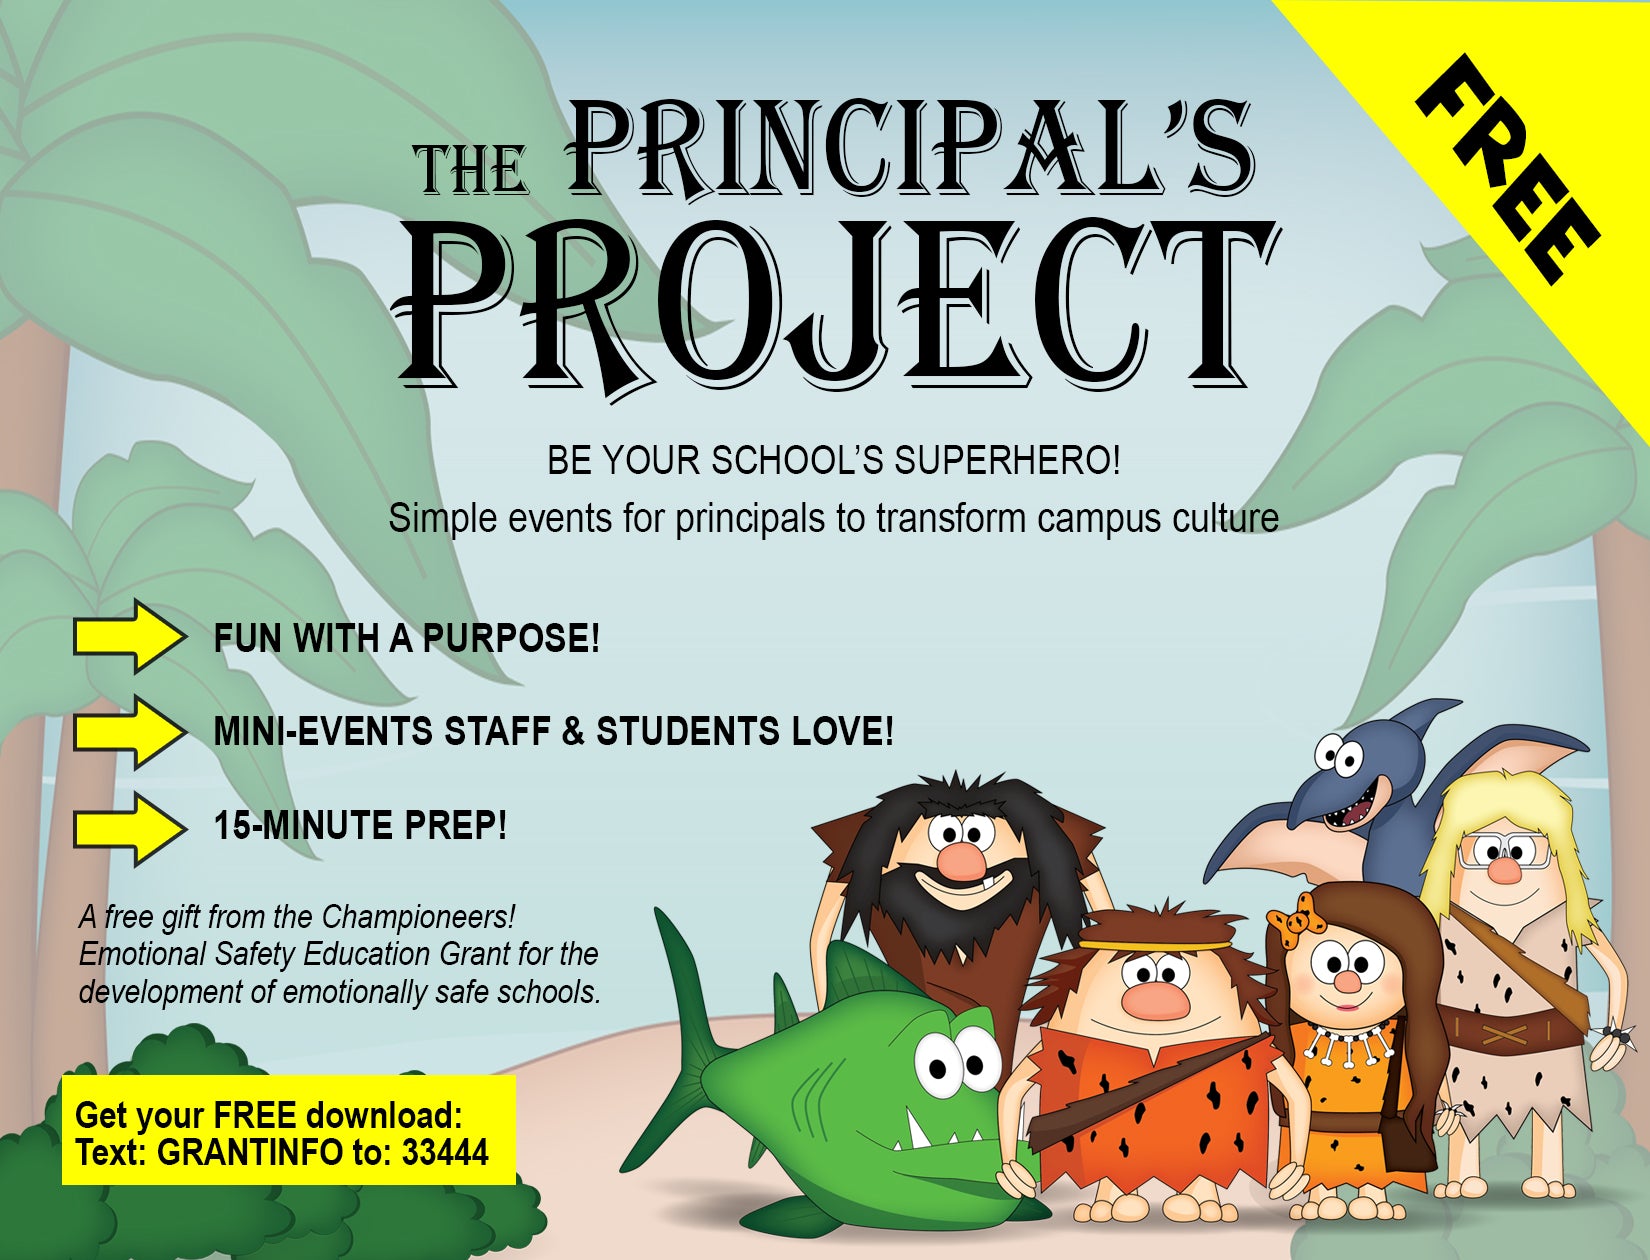 The Principal's Project - Instant Events